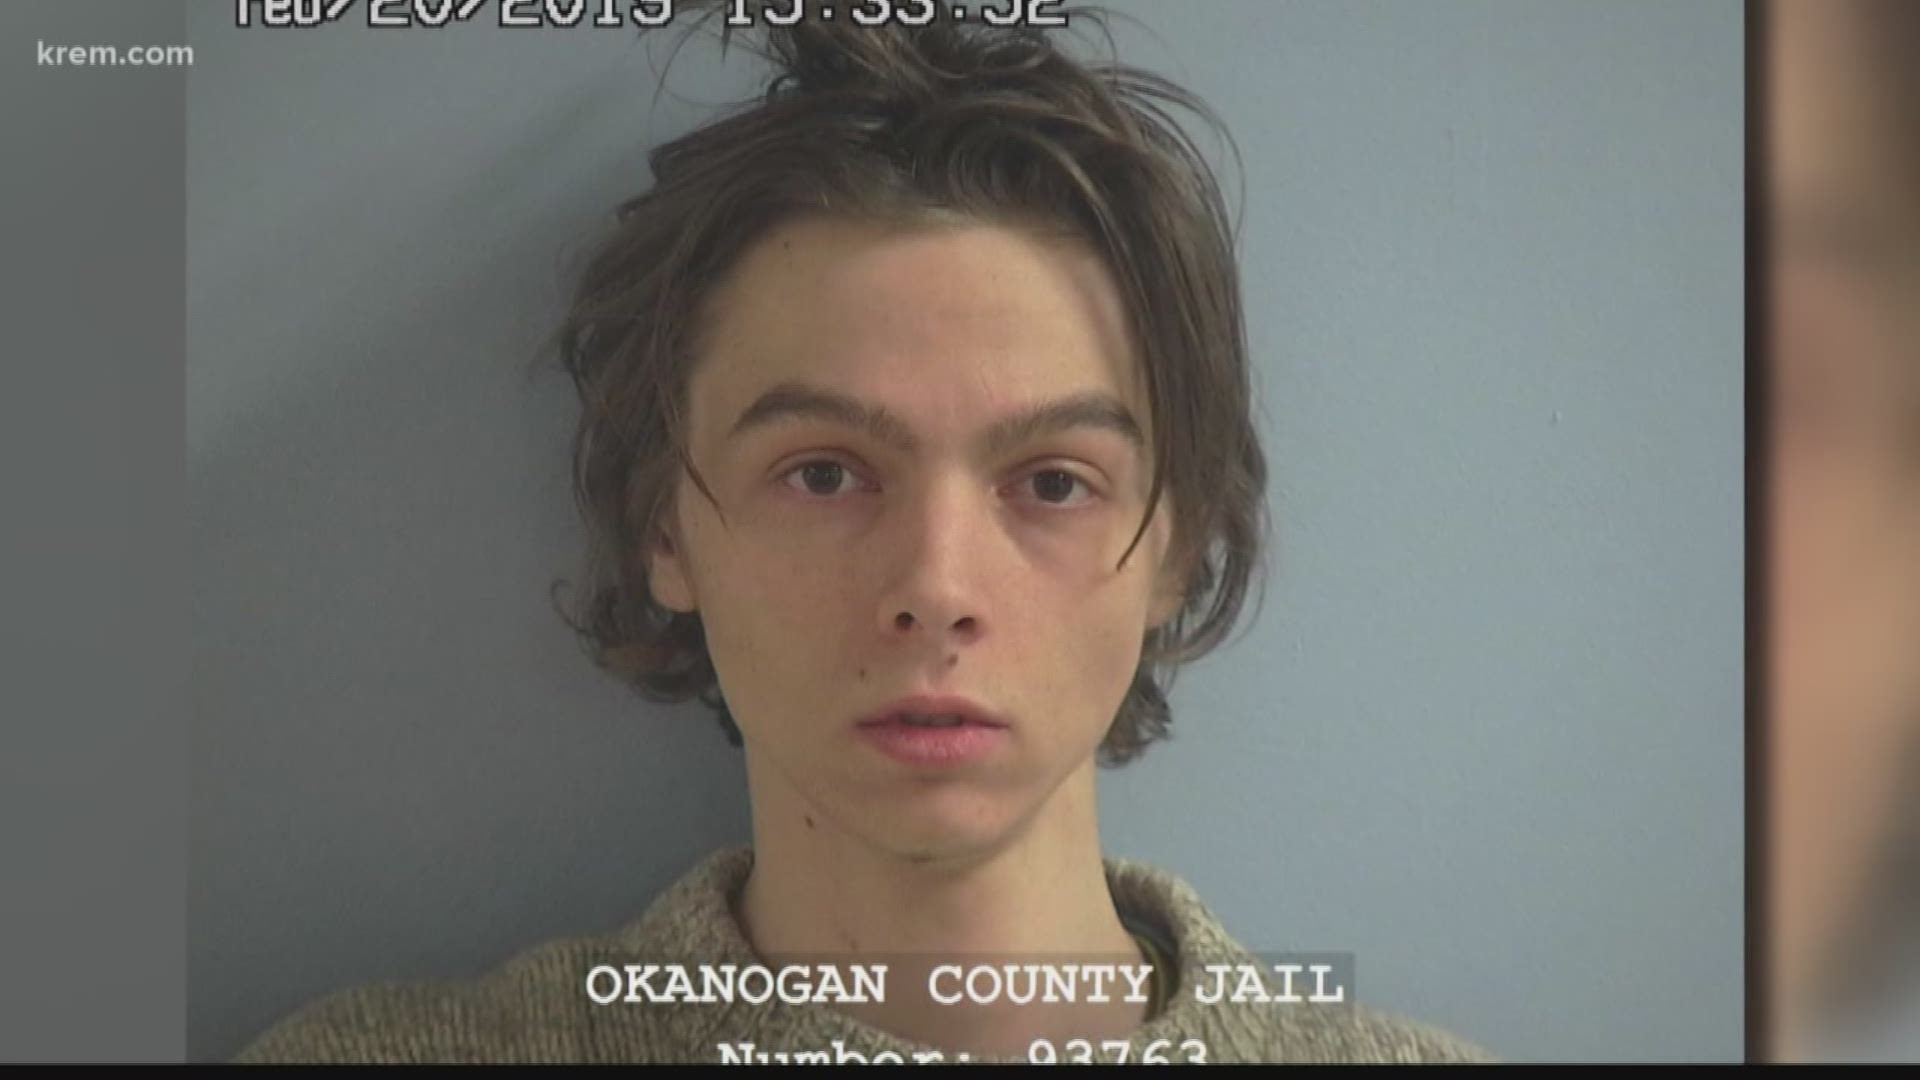 Okanogan County Sheriff Tony Hawley said a search warrant was served at Jaydin Ledford’s home at 11:50 a.m.